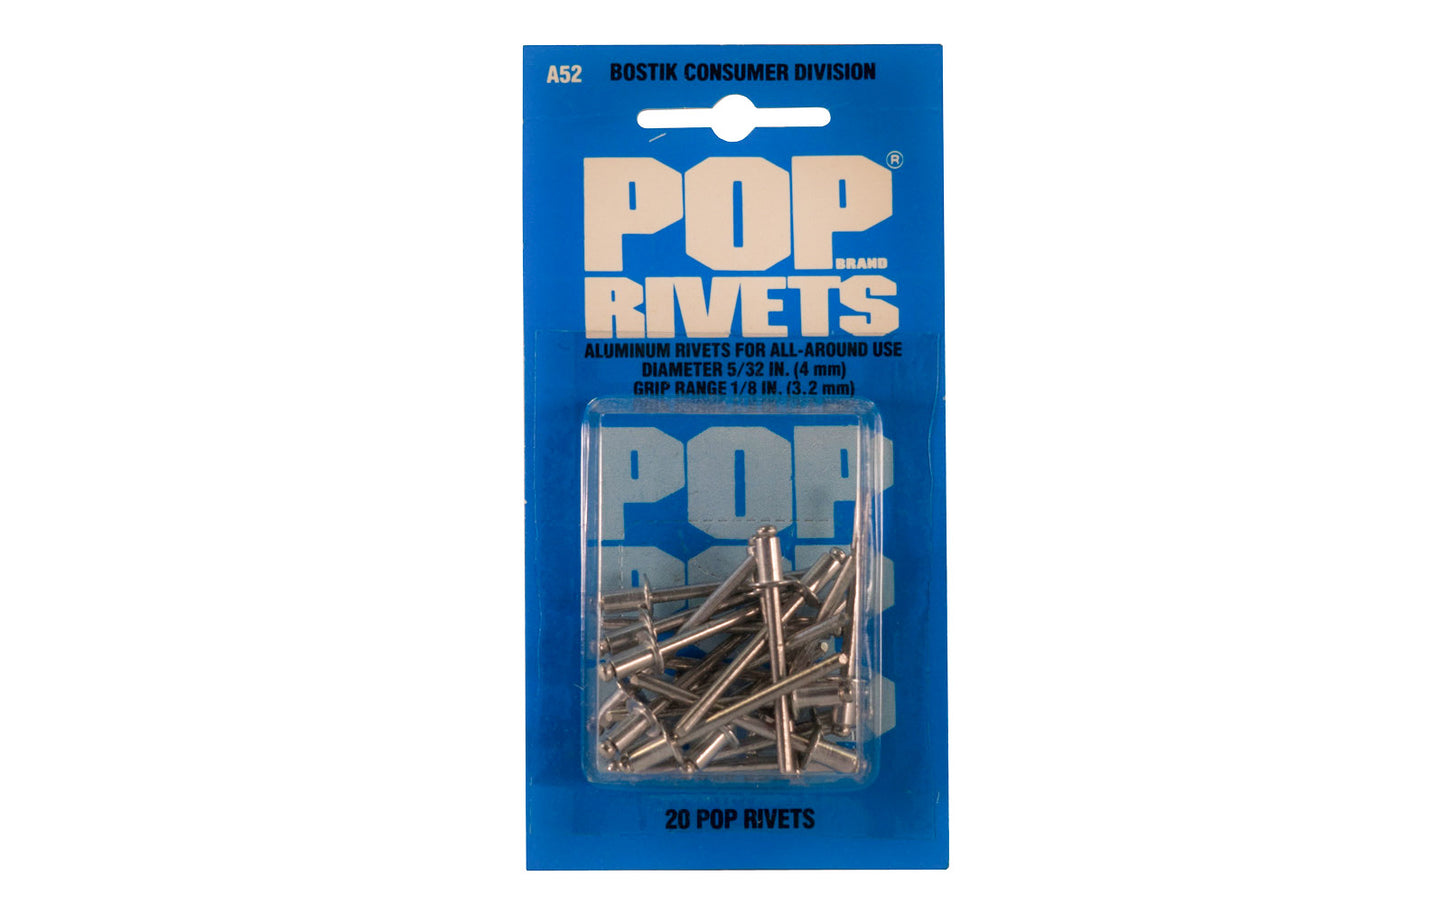 POP Rivets 5/32" x 1/8" Aluminum Rivets - 20 Pack. Model A52. Aluminum Rivets produce a strong & tamper-proof joint. For joining sheet metal, aluminum, fabrics, plastics, & leather. Use on metal cabinets, aluminum doors, & windows, metal fixtures, automobiles, heating ducts, gutters, & downspouts. Made in USA.